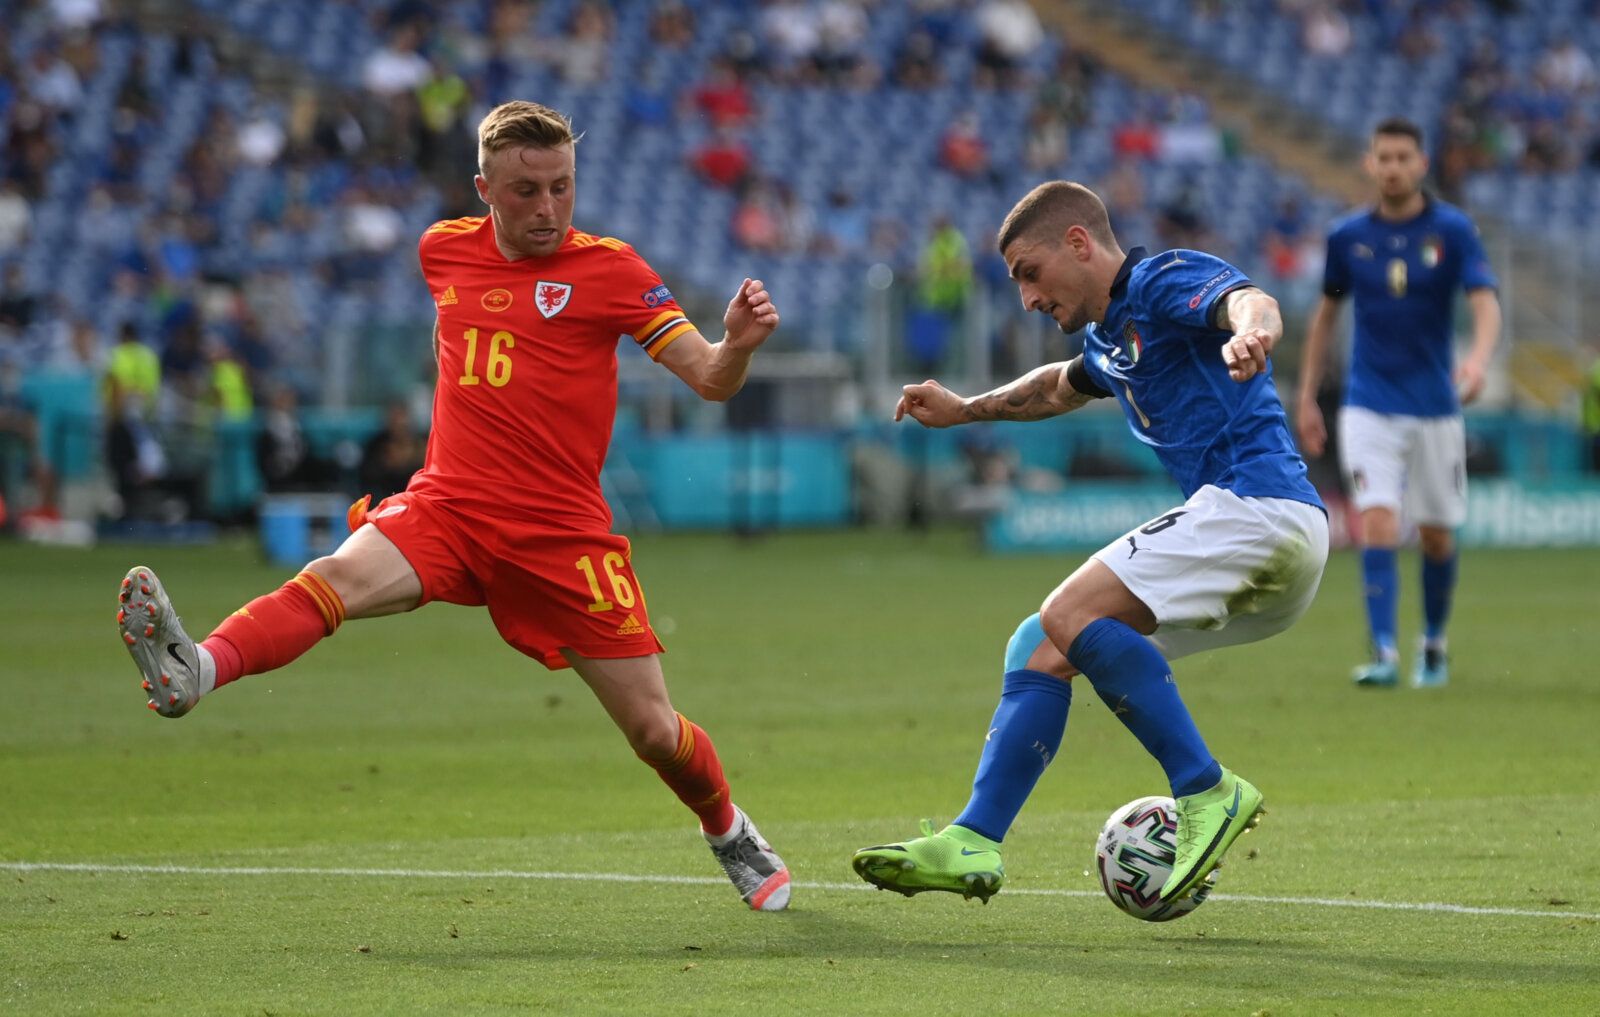 Soccer Football - Euro 2020 - Group A - Italy v Wales - Stadio Olimpico, Rome, Italy - June 20, 2021  Italy's Marco Verratti in action with Wales' Joe Morrell Pool via REUTERS/Mike Hewitt